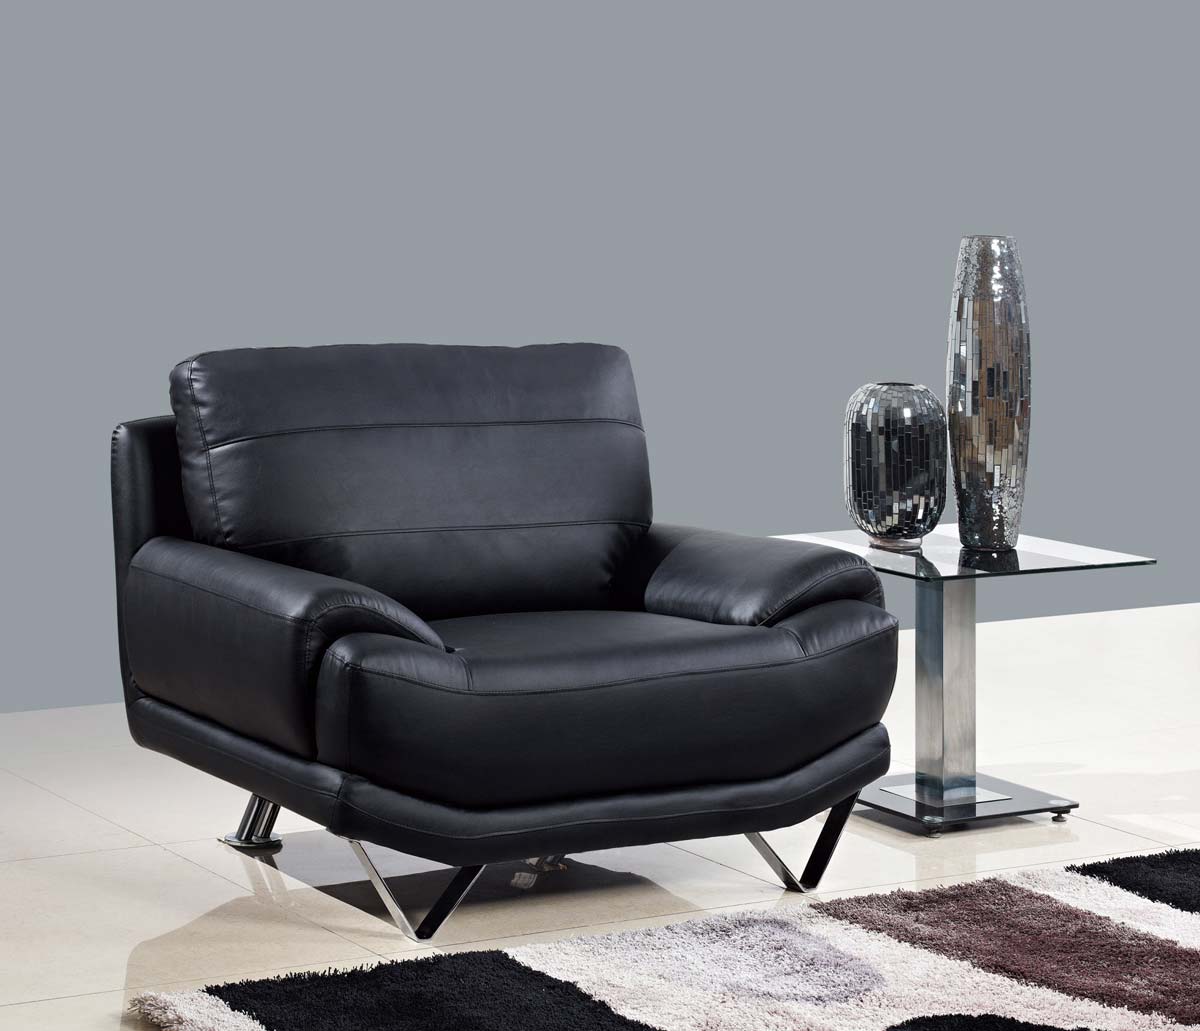 Global Furniture USA 4030 Chair - Black/Bonded Leather with Metal Legs